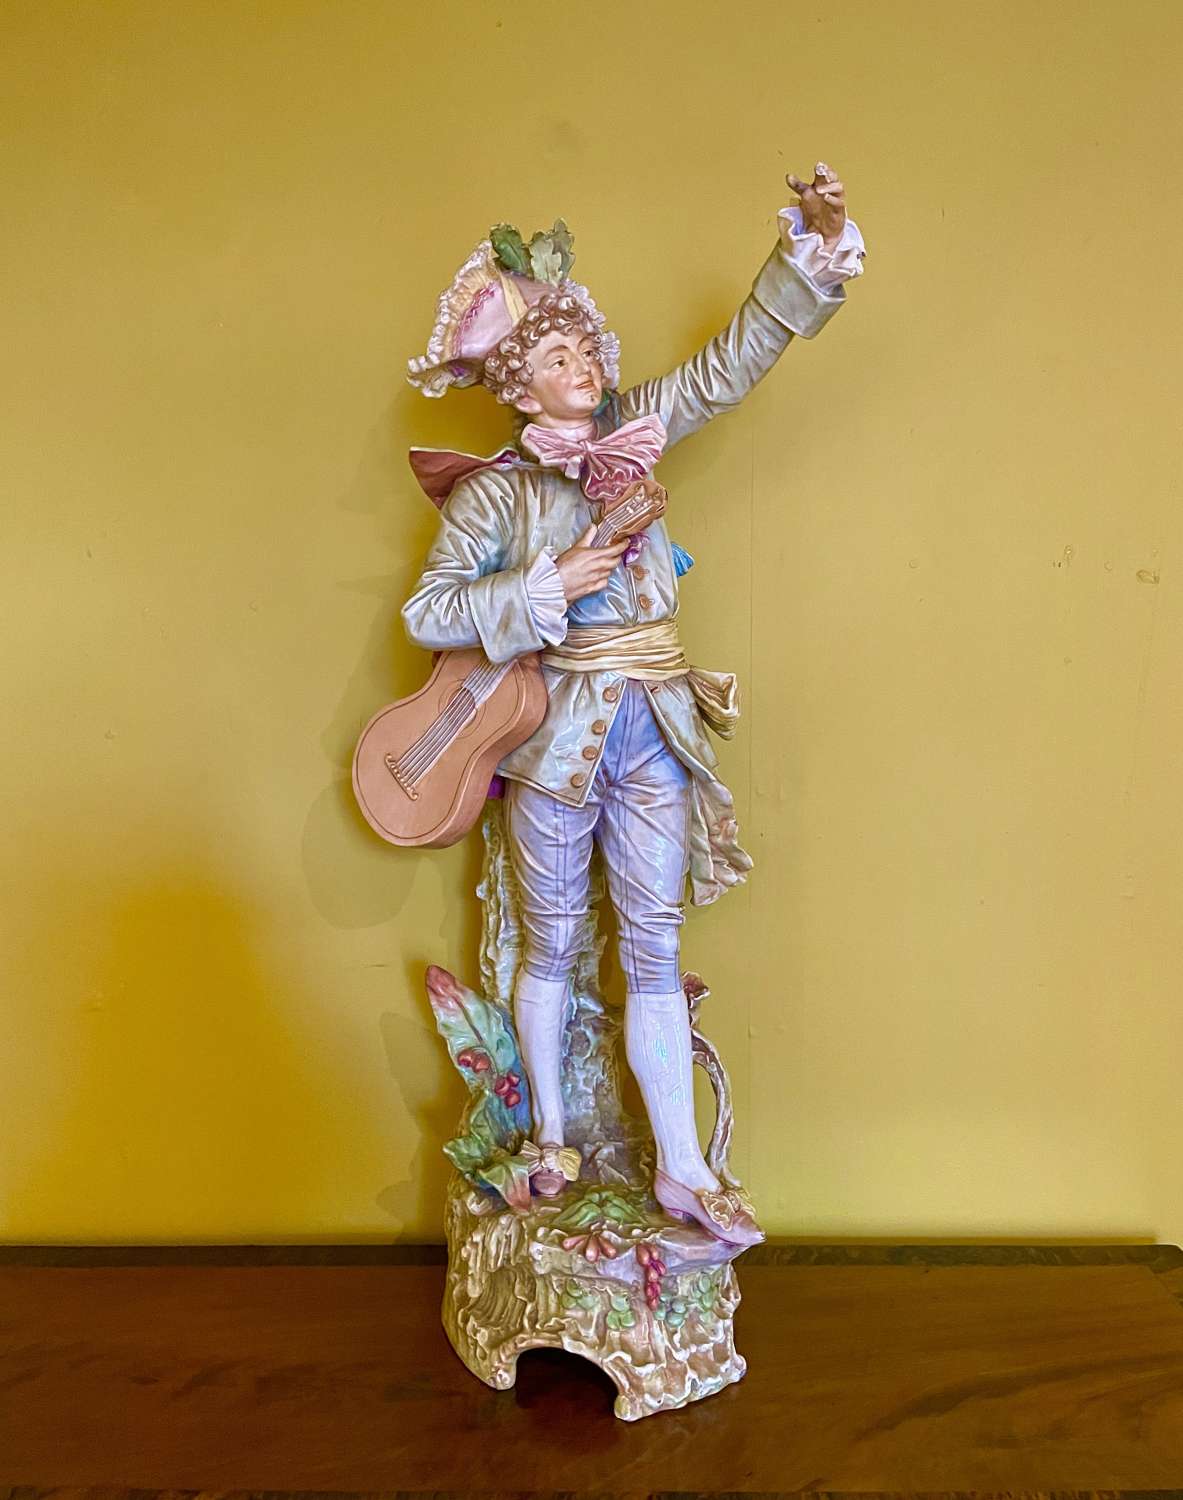 Extremely Large 19th Century German Porcelain Figure of a Minstrel